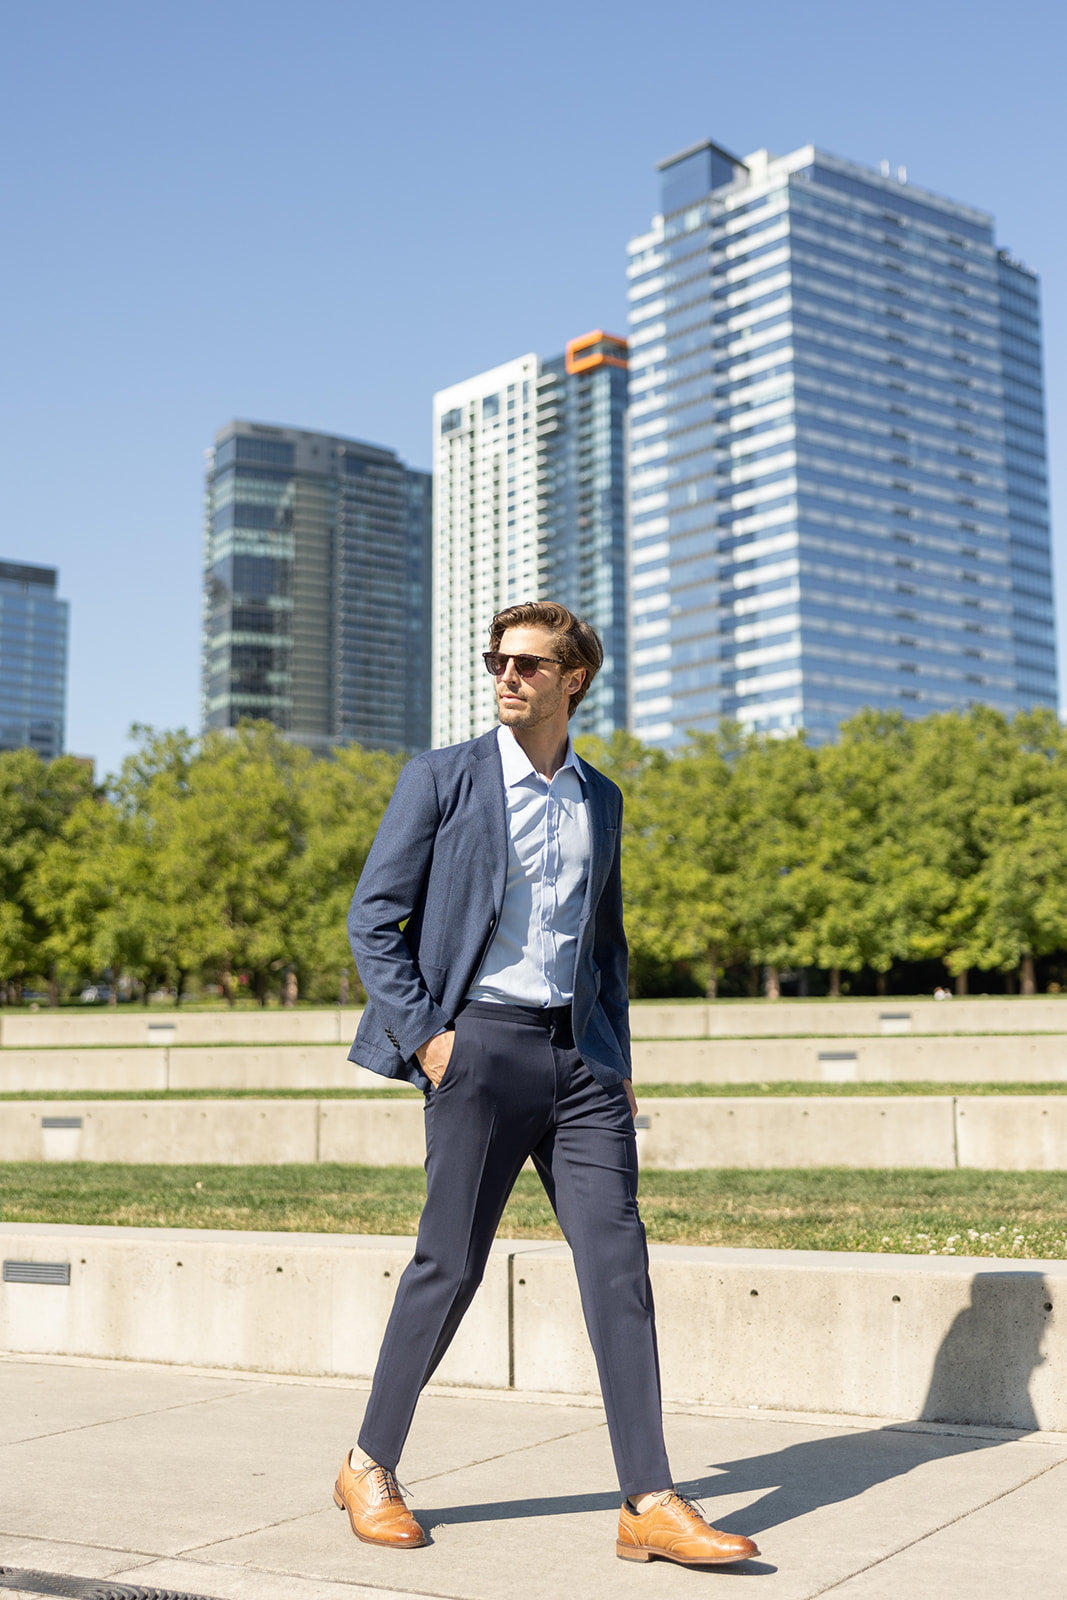 How to Wear a suit in Hot Weather (Stop Sweating During Summer!)